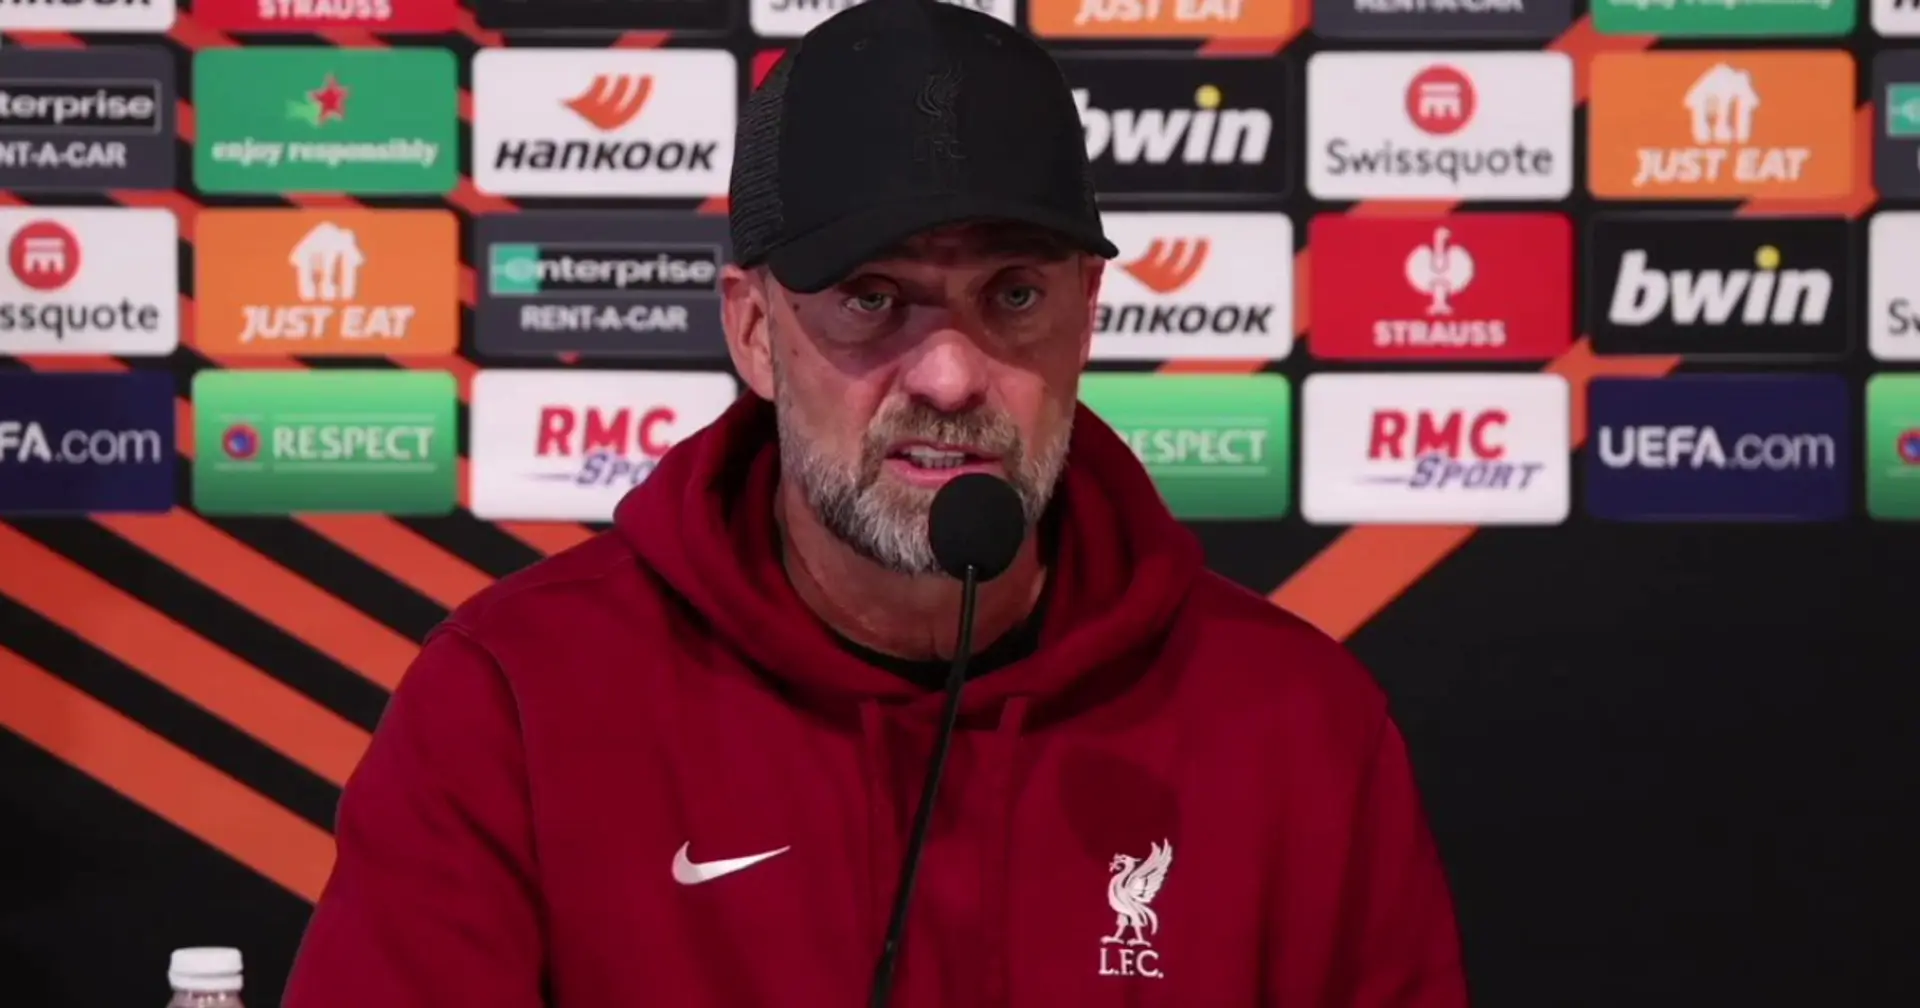 Jurgen Klopp on LASK win: 'This game should've been put to bed before half-time'